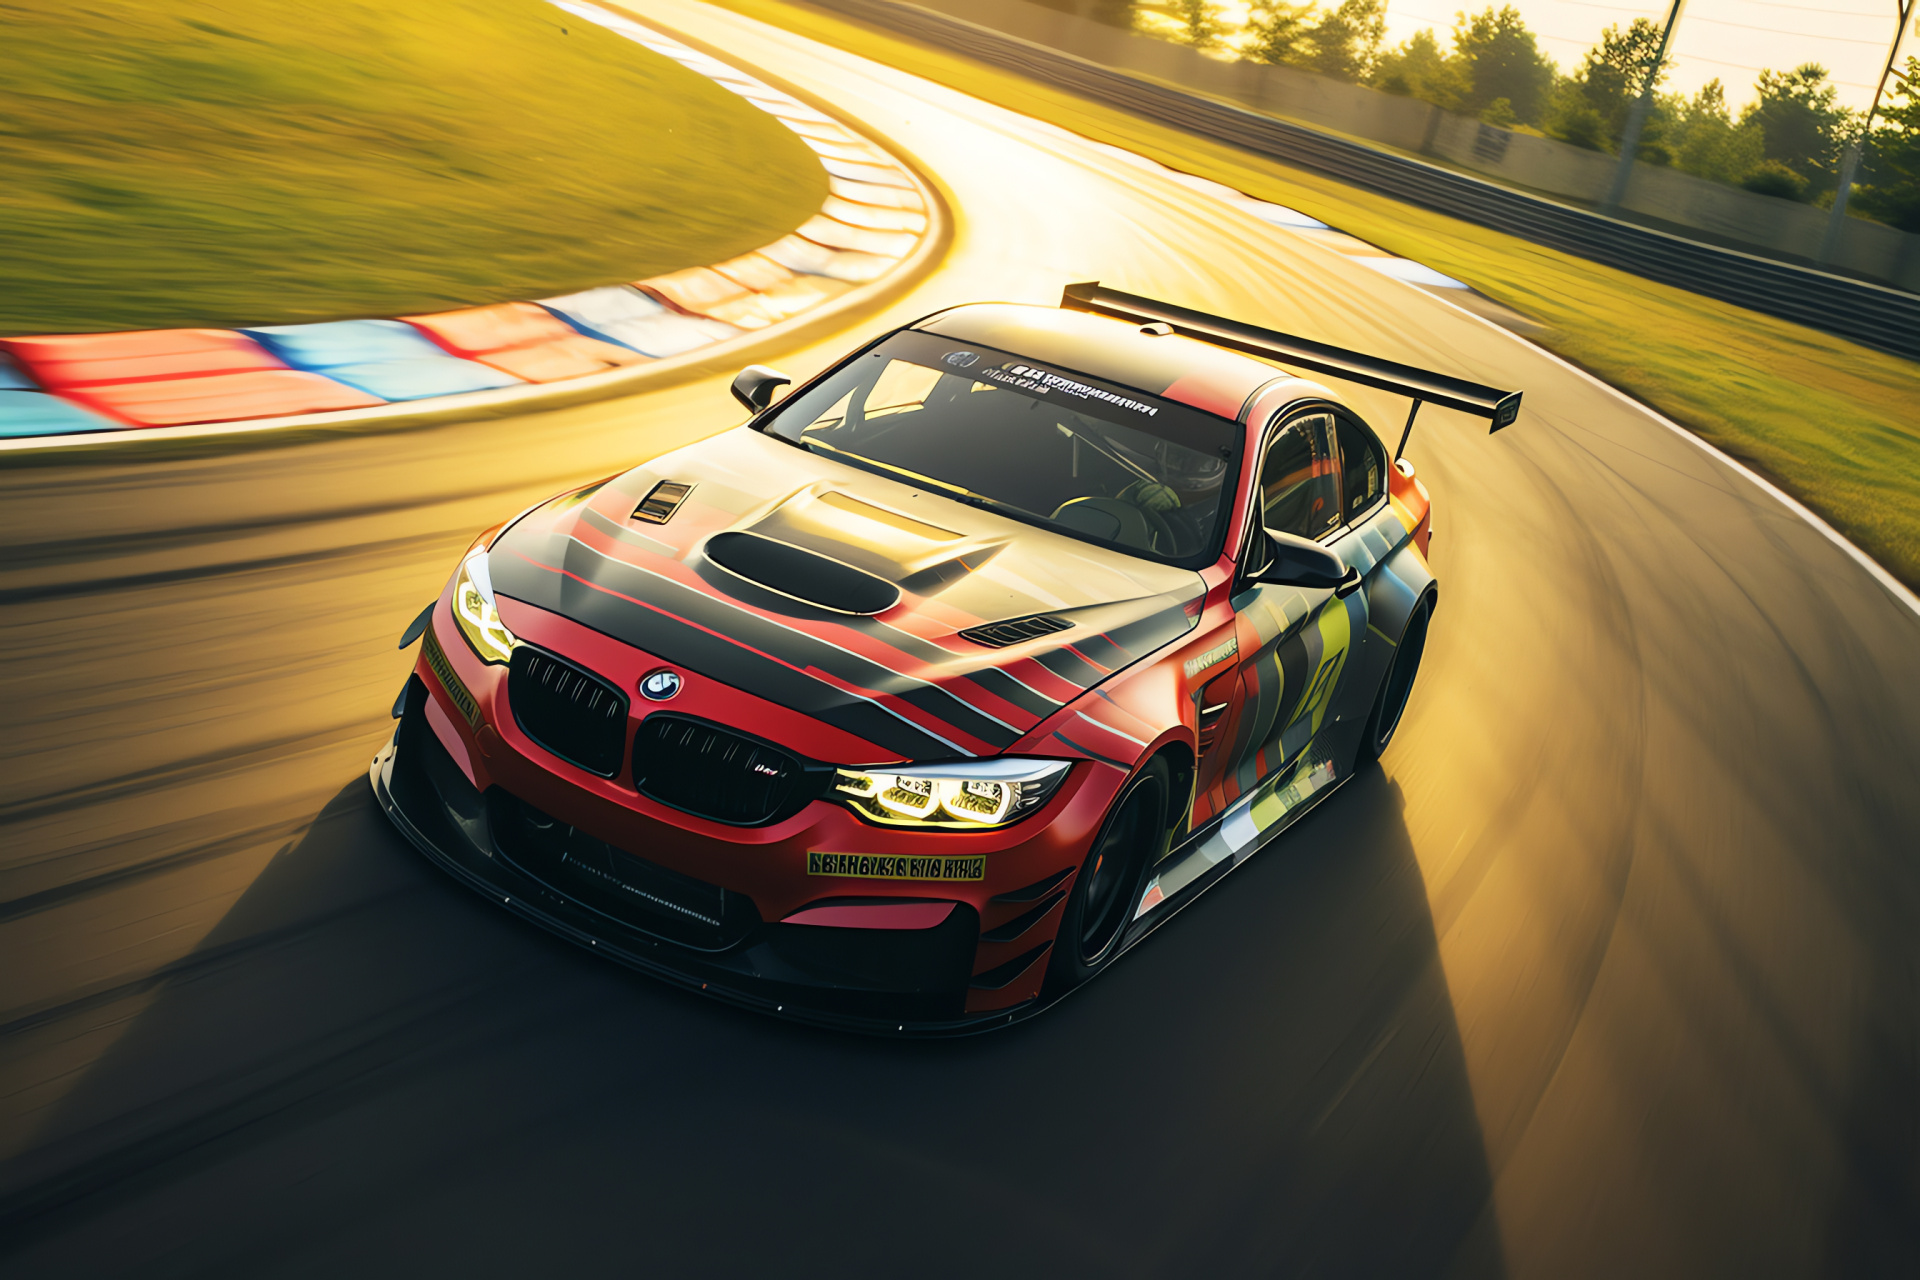 Race BMW M3, Rocket Bunny equipped, Motorsport environment, Circuit top view, High-speed chase, HD Desktop Image